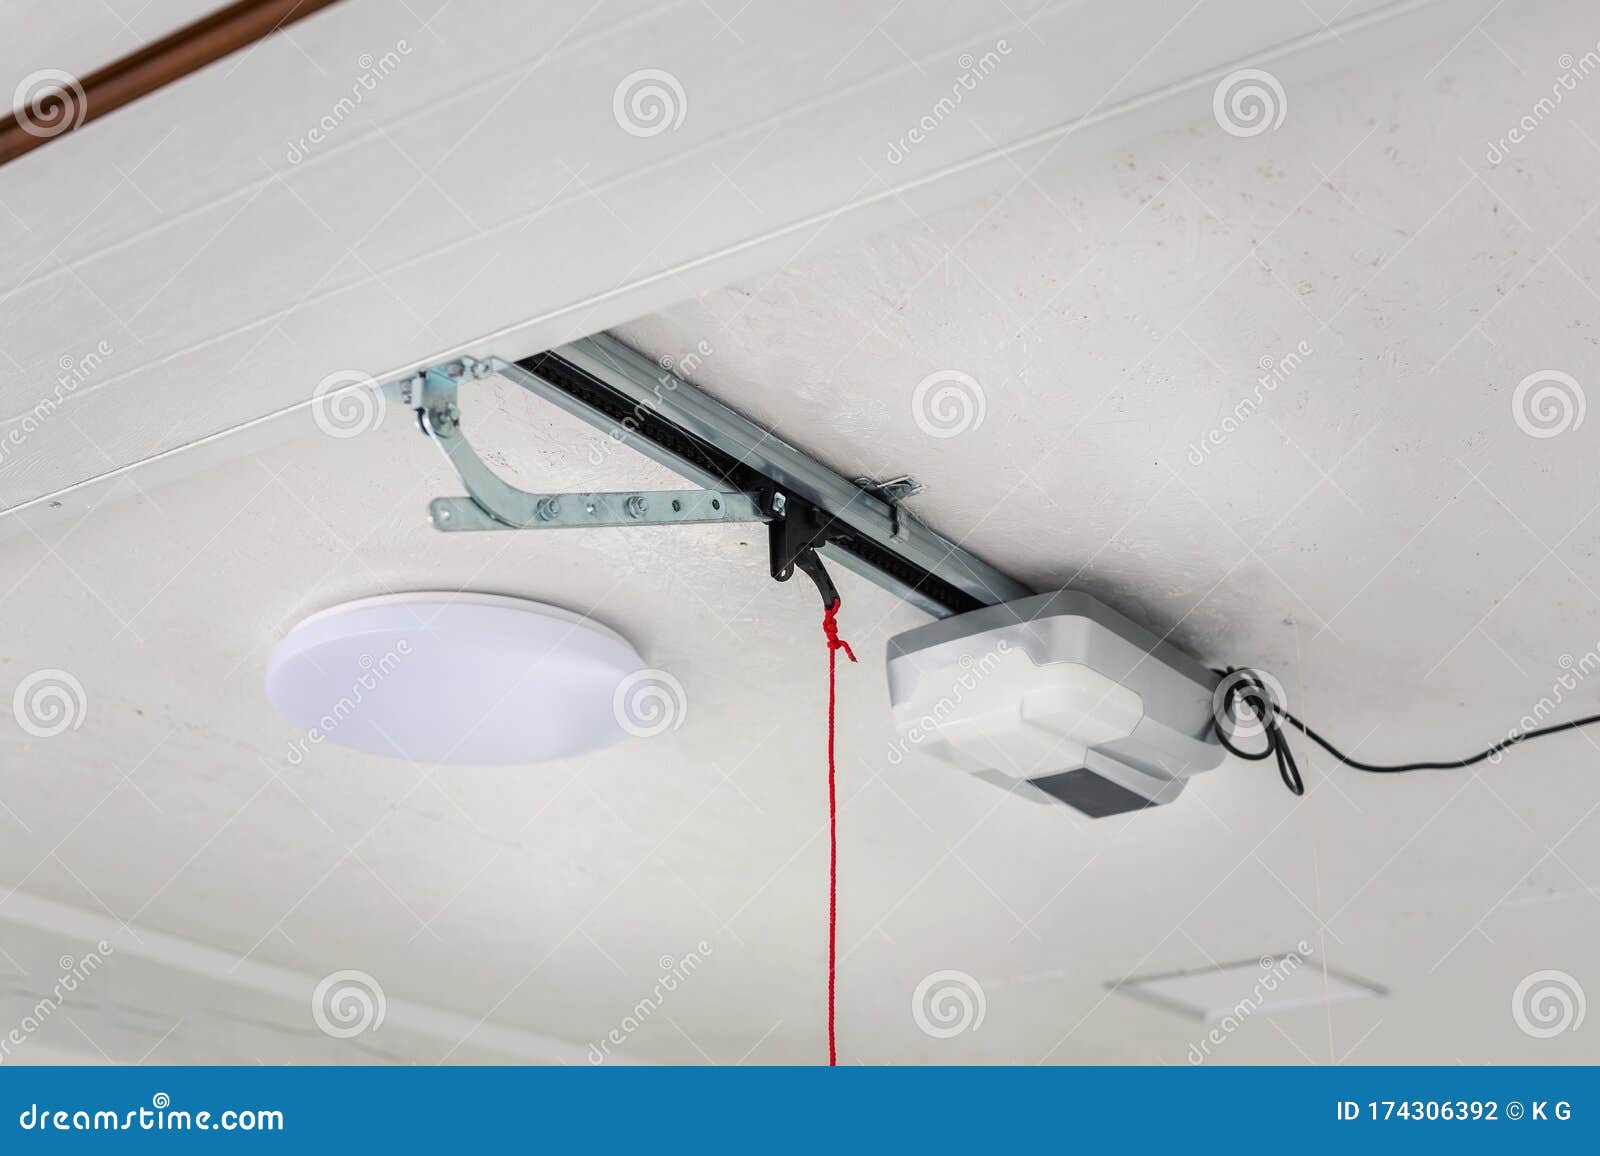 Opening Door And Automatic Garage Door Opener Electric Engine Gear Mounted On Ceiling With Emergency Cord Double Place Empty Stock Photo Image Of Light Floor 174306392